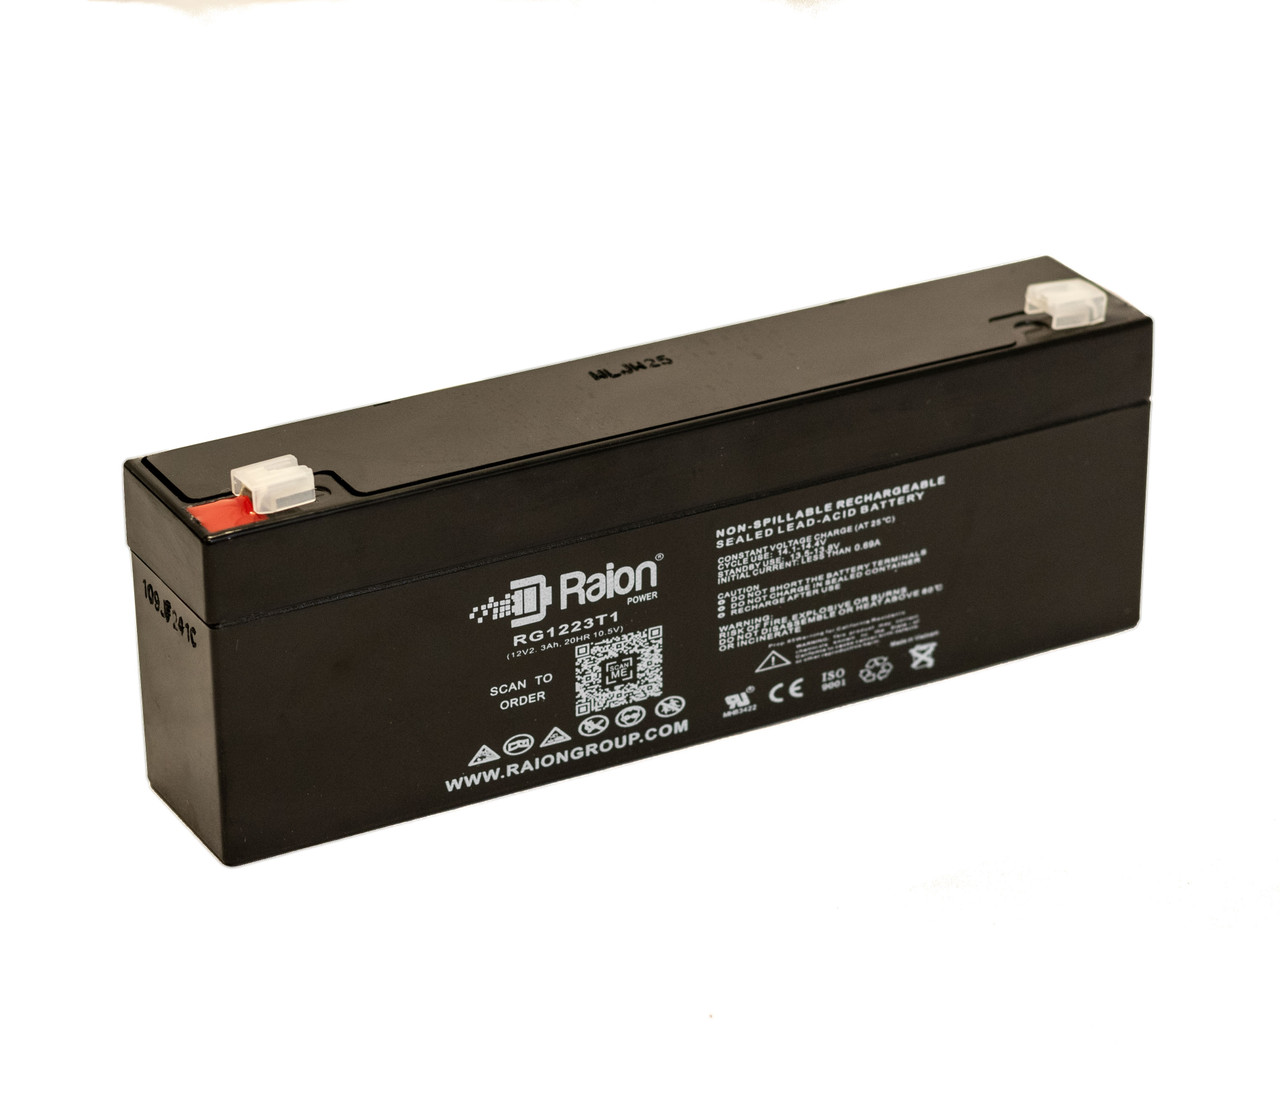 Raion Power RG1223T1 Replacement Battery for Schiller America AT102